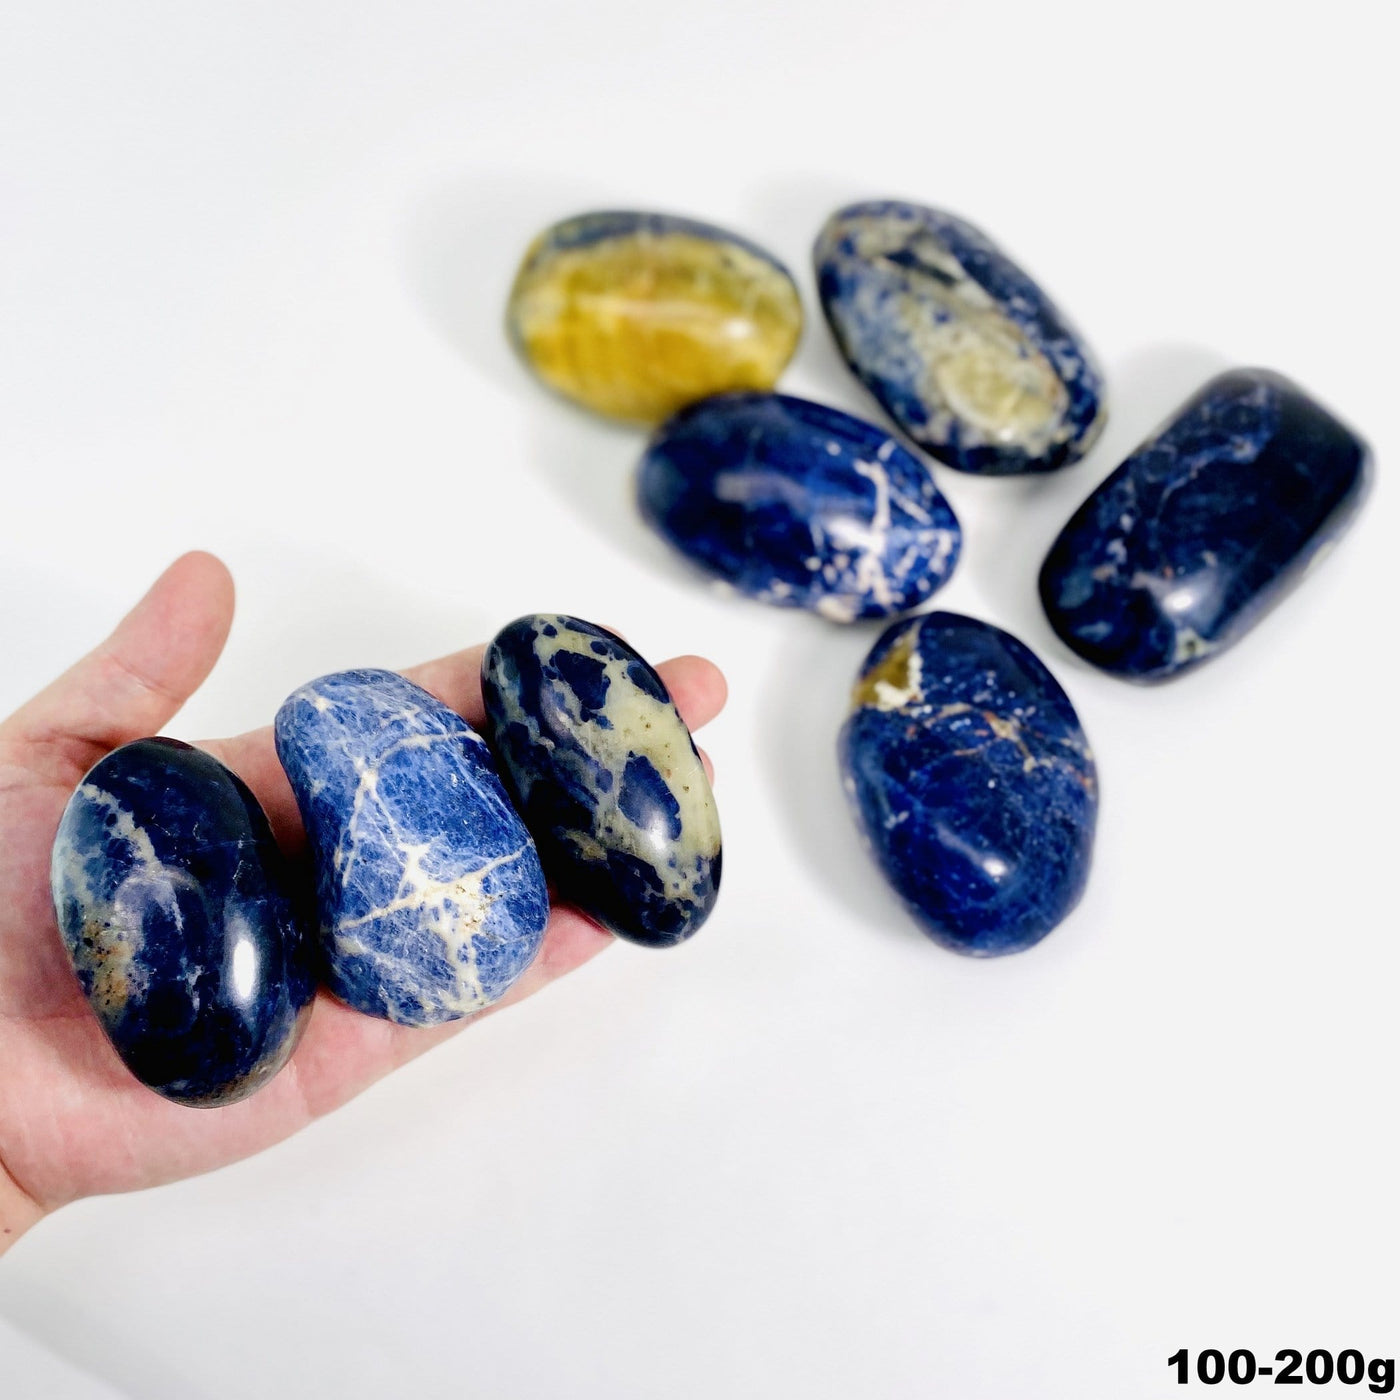 three 100g - 200g sodalite large tumbled stones for size reference with many others in white background for possible variations